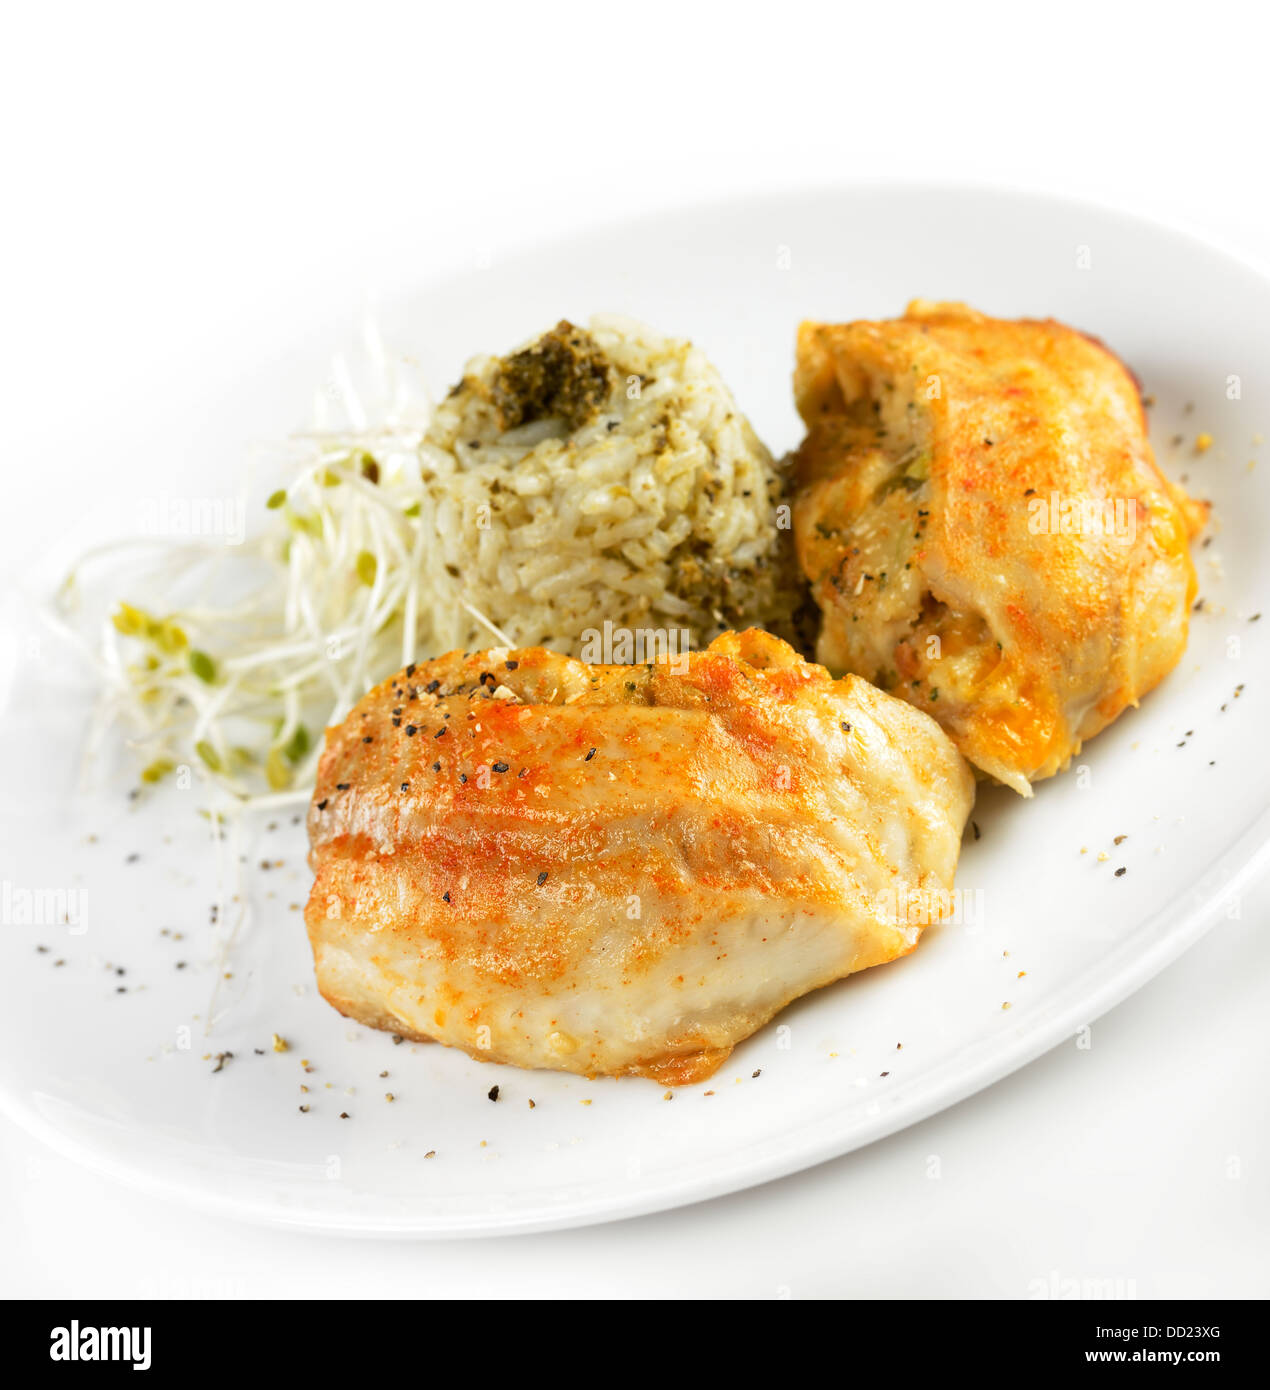 Stuffed Tilapia Fillet With Rice Stock Photo